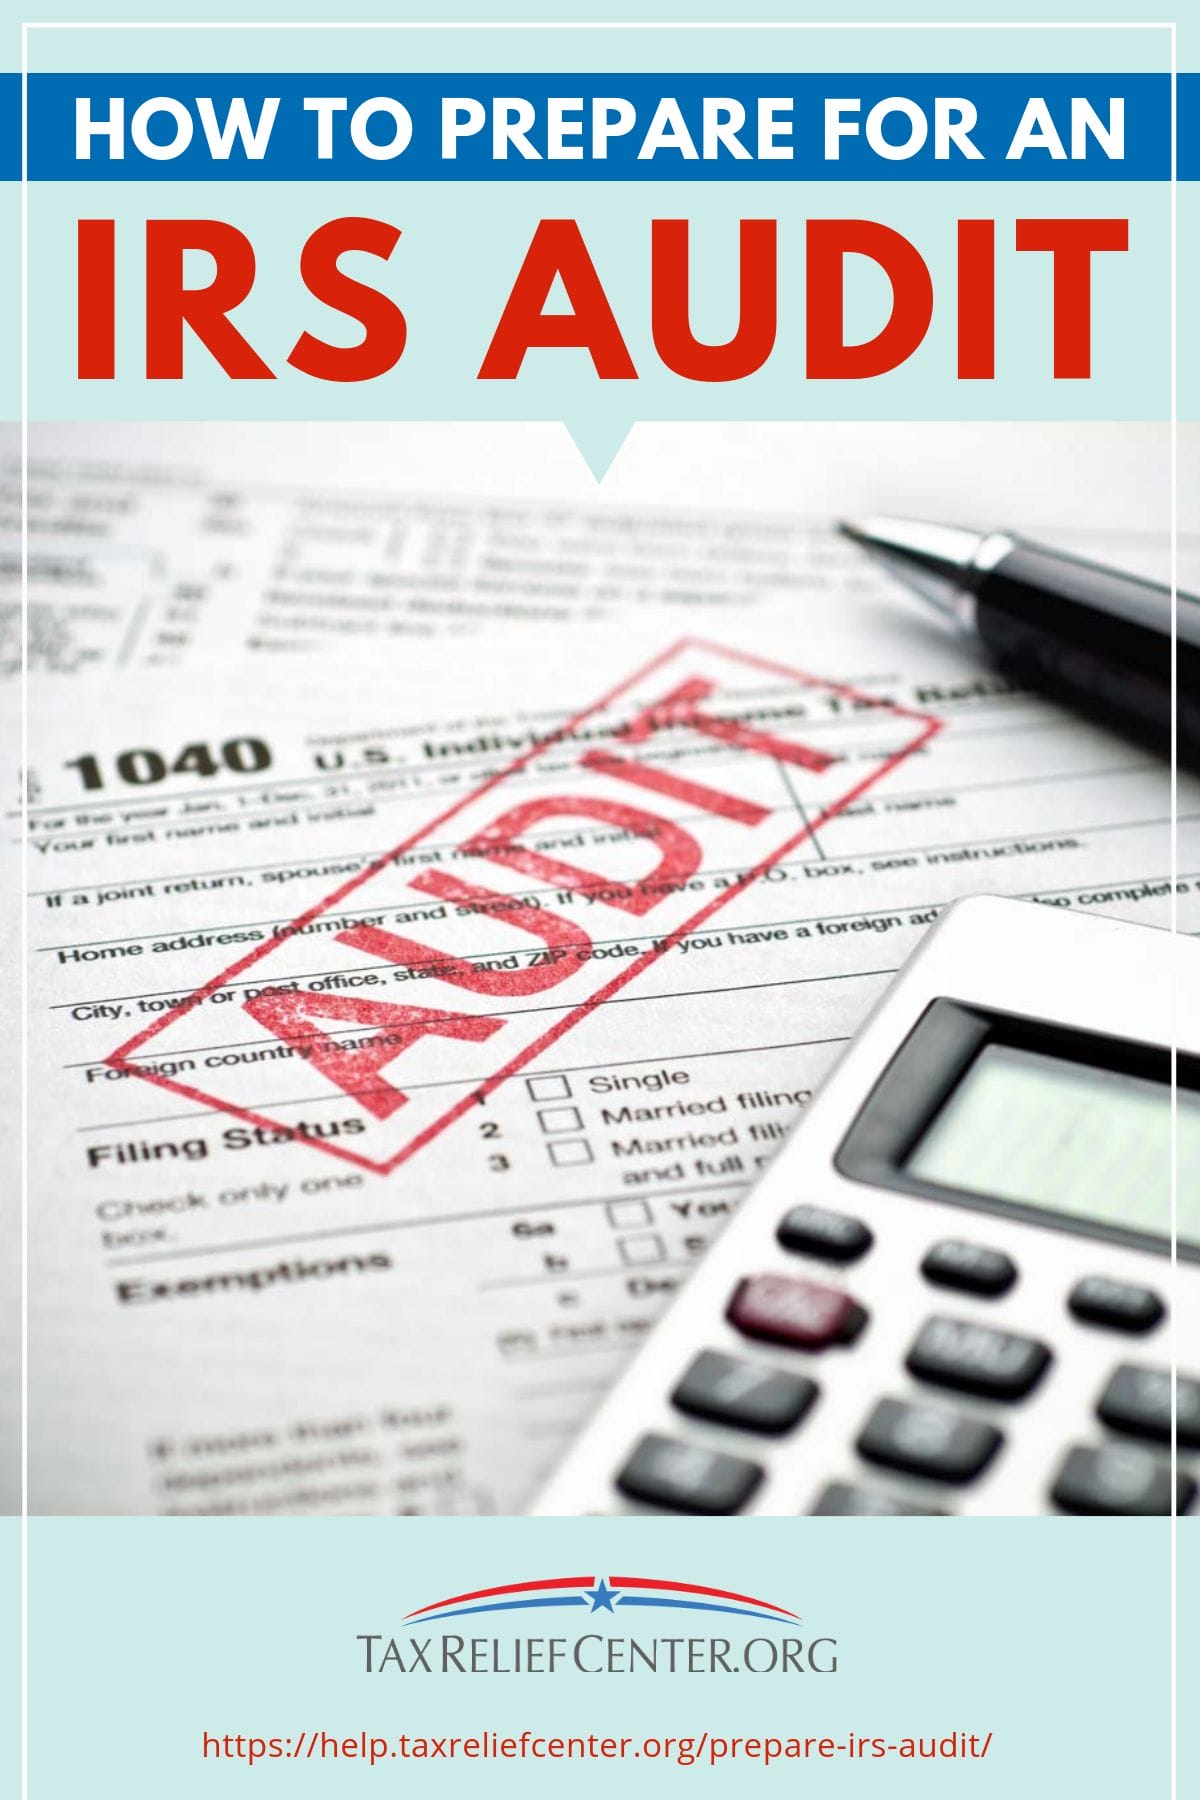 How To Prepare For An IRS Audit